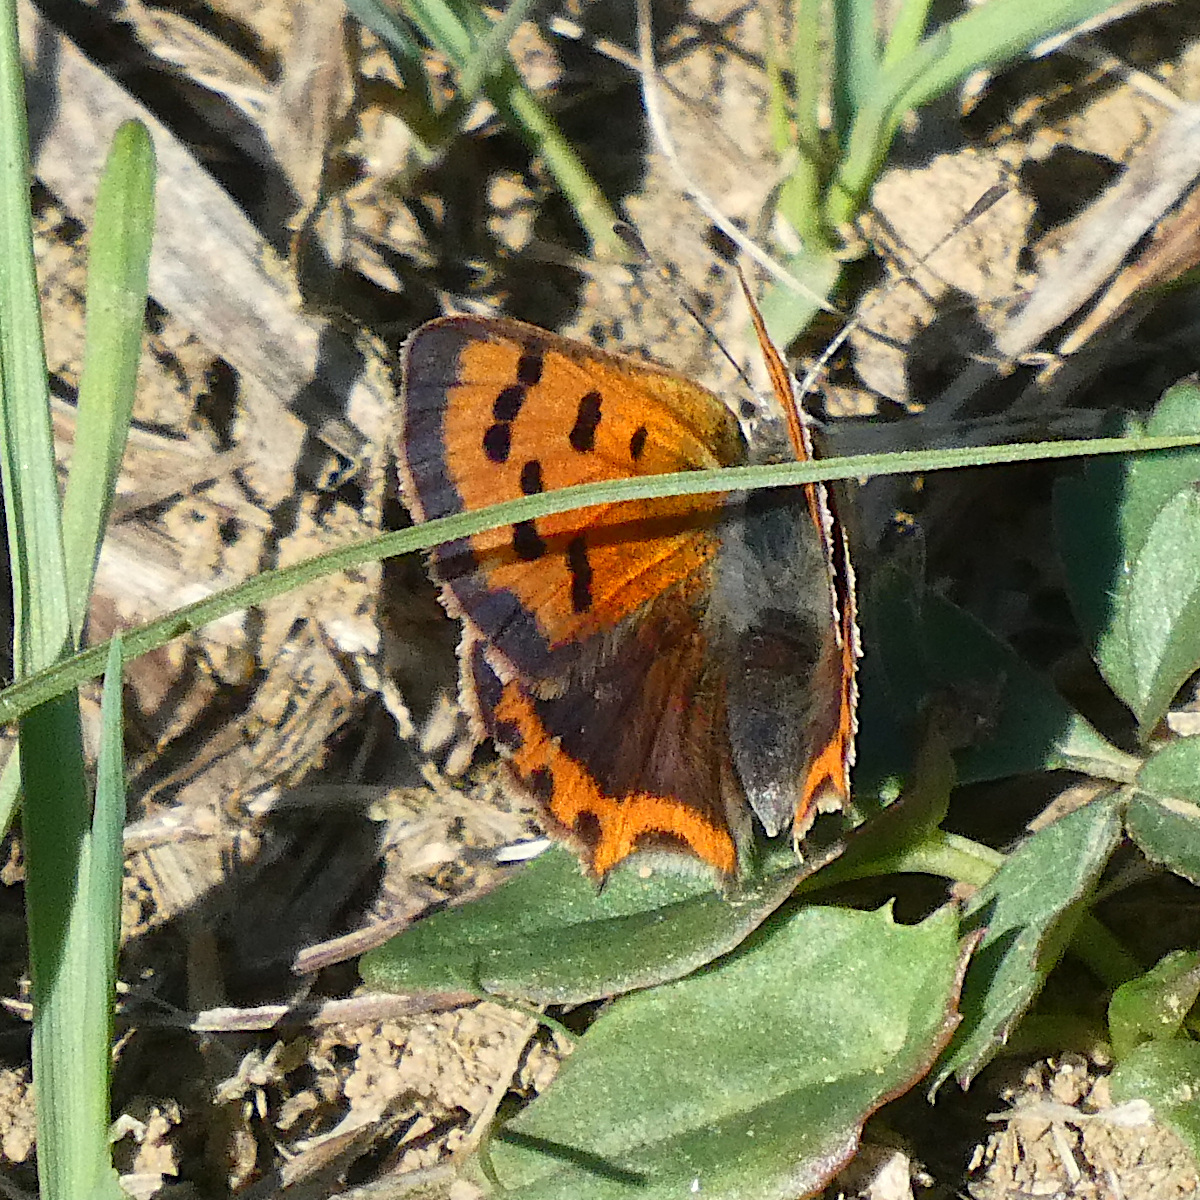 Small Copper Knebworth Park 17 Sep